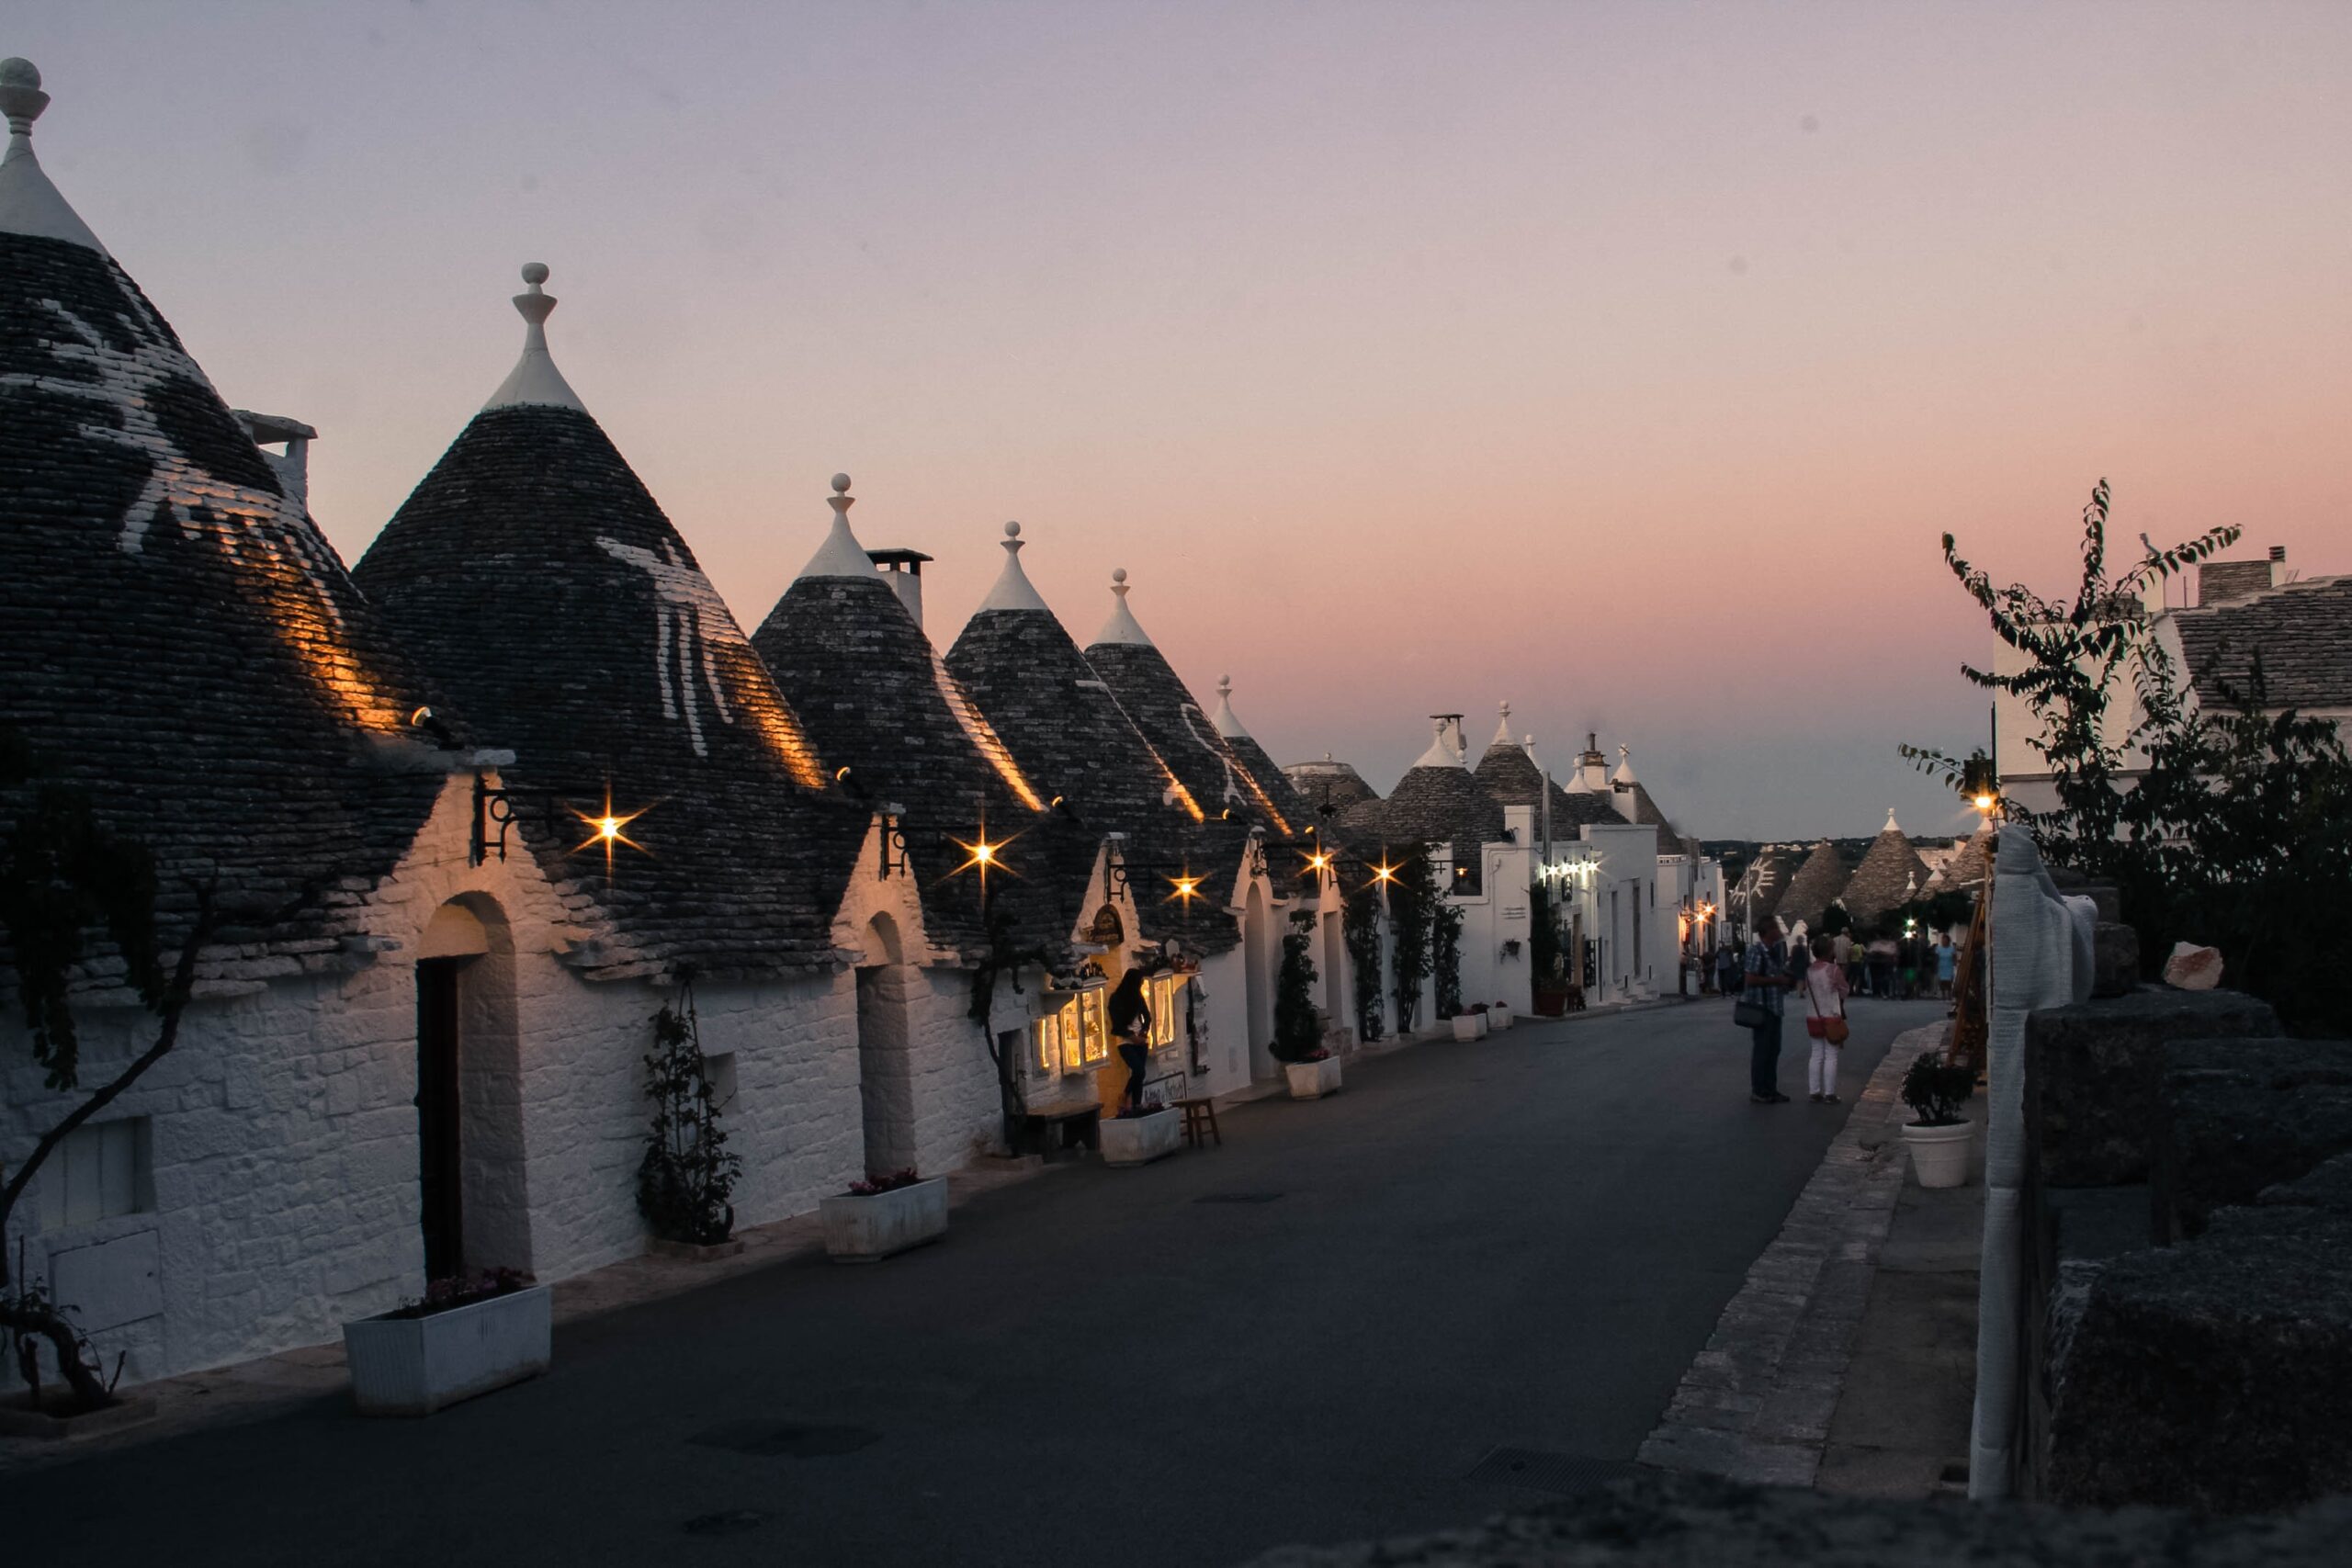 Road in Alberobello with white houses with conical rooftops